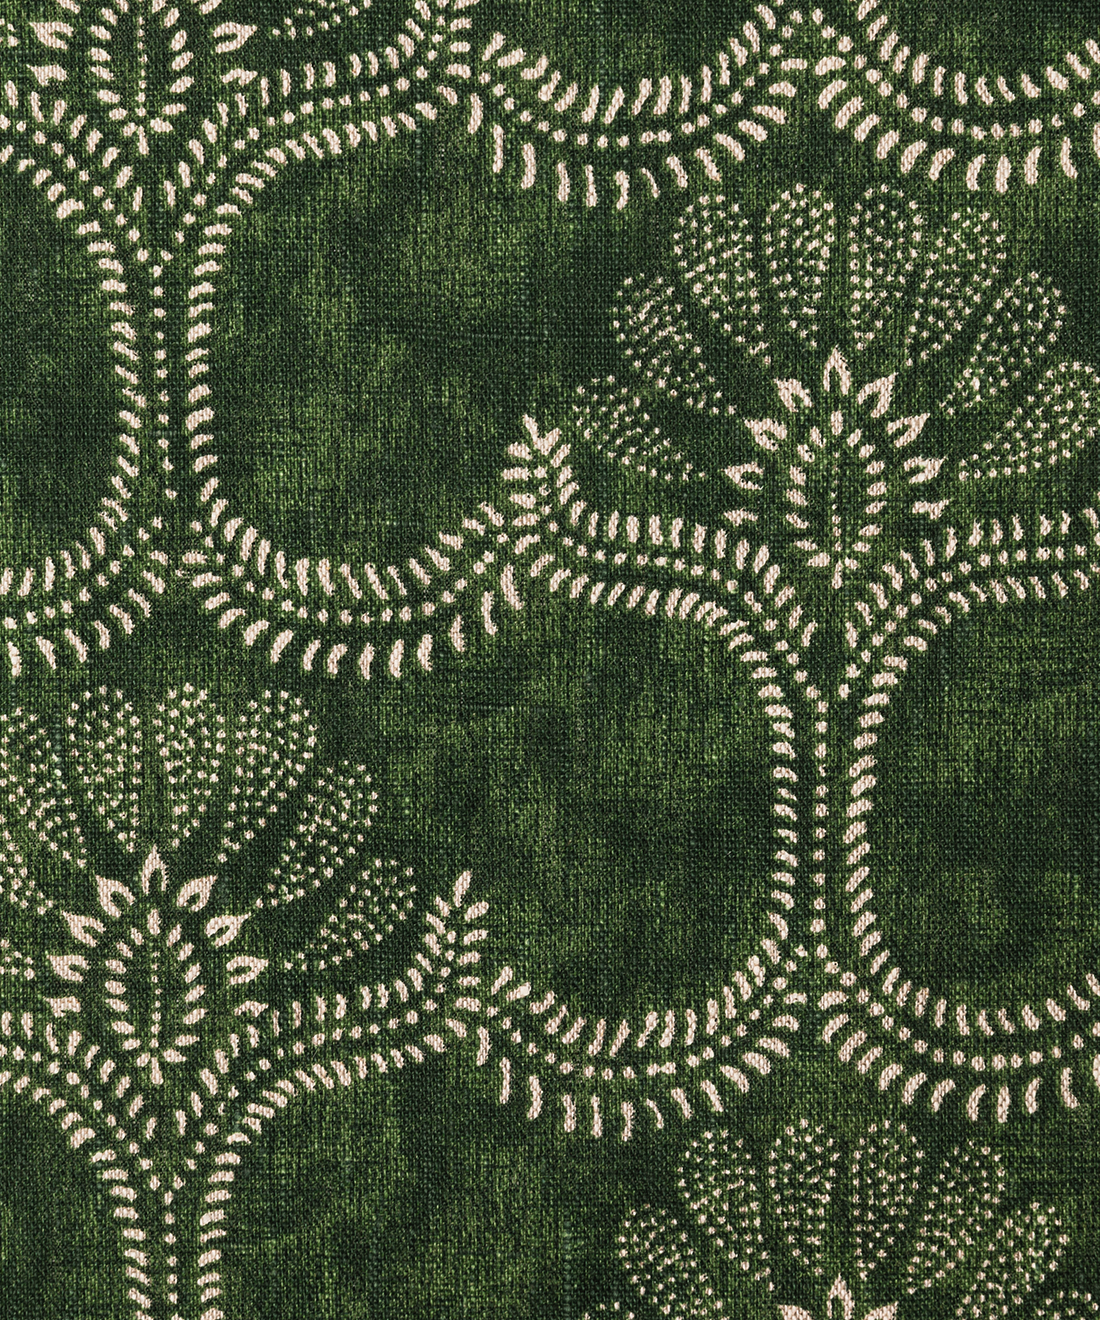 Whiteman & Mellor's Arabesque in Green, Linen Fabric by the Meter